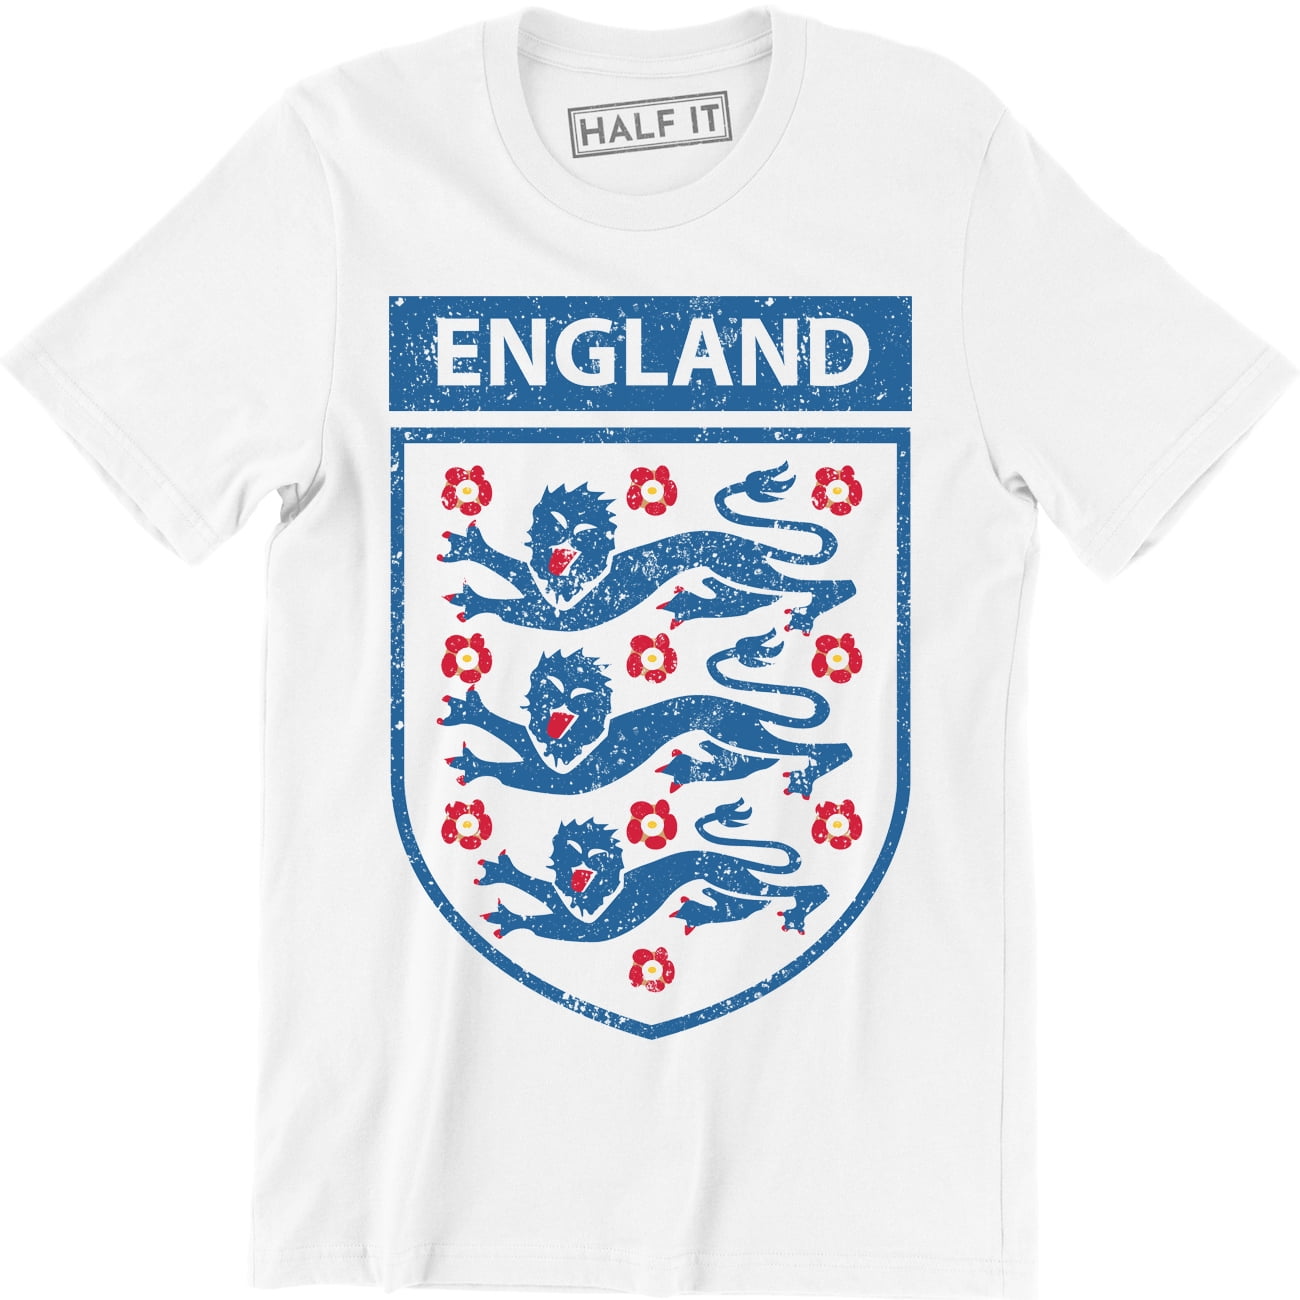 3 LIONS BELIEVE SMALL CREST ENGLAND FOOTBALL WORLD CUP 2018 RINGER T-SHIRT MENS 